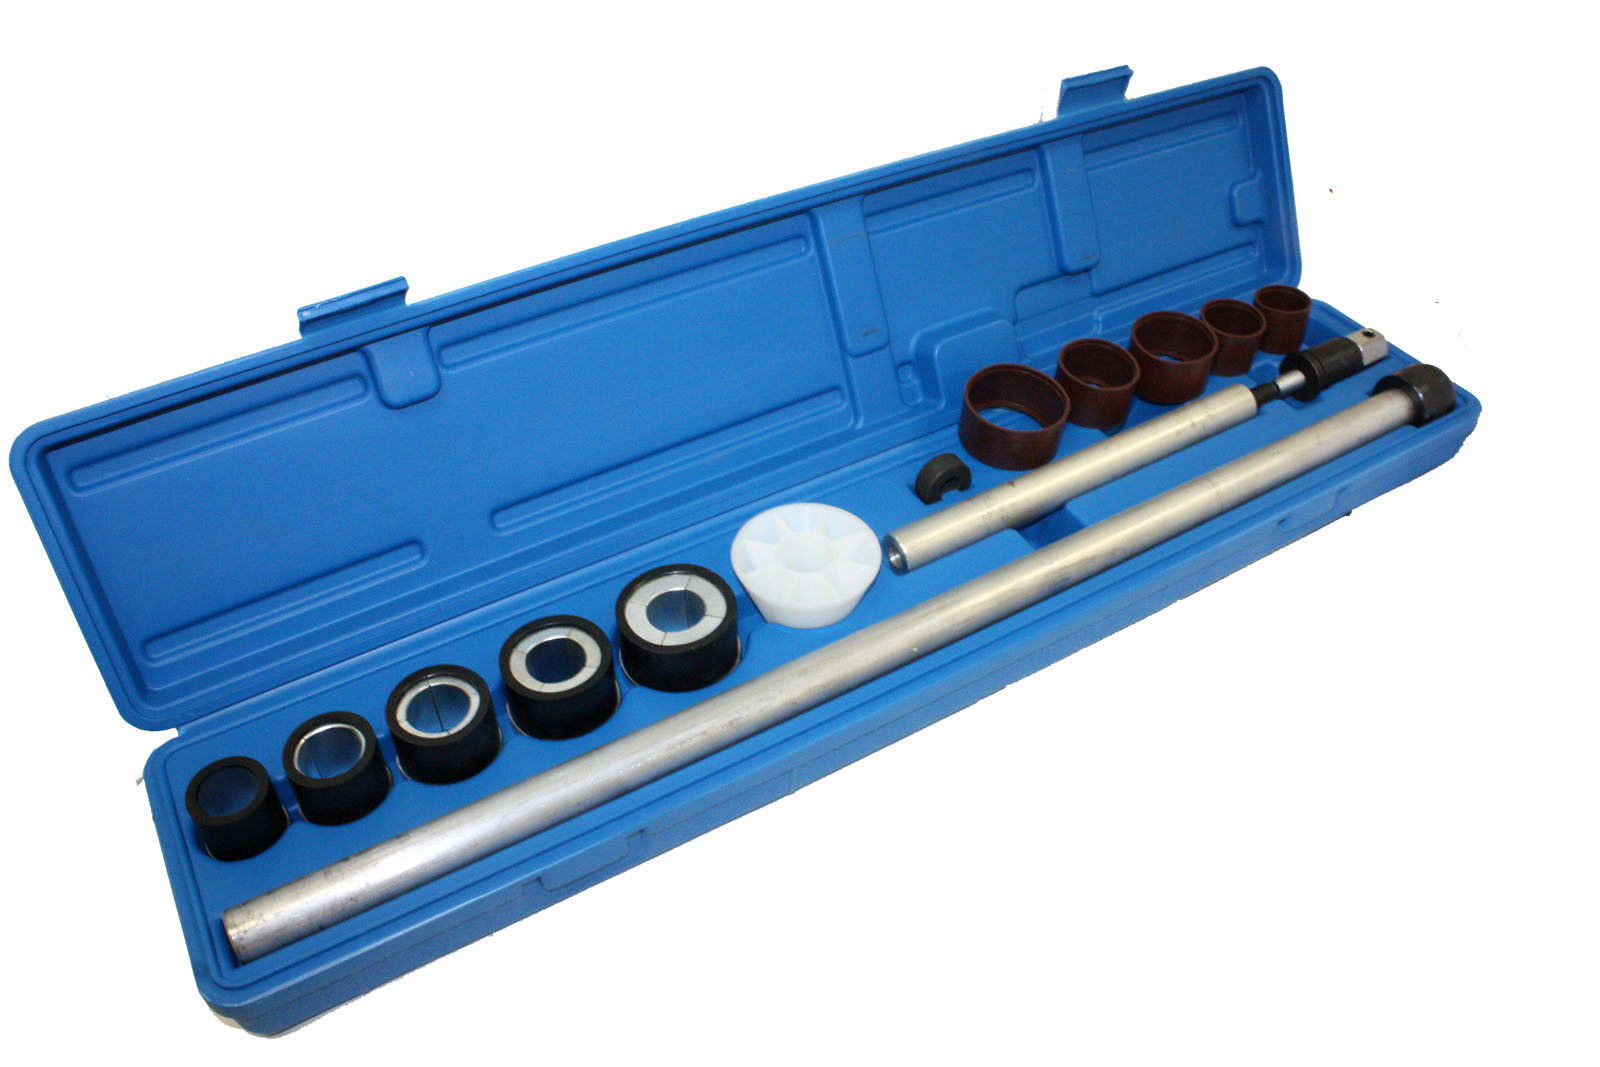 FEXON Universal Camshaft Cam Bearing Tool Kit for Installation and Removal Fit for Most Domestic and Import Vehicles 